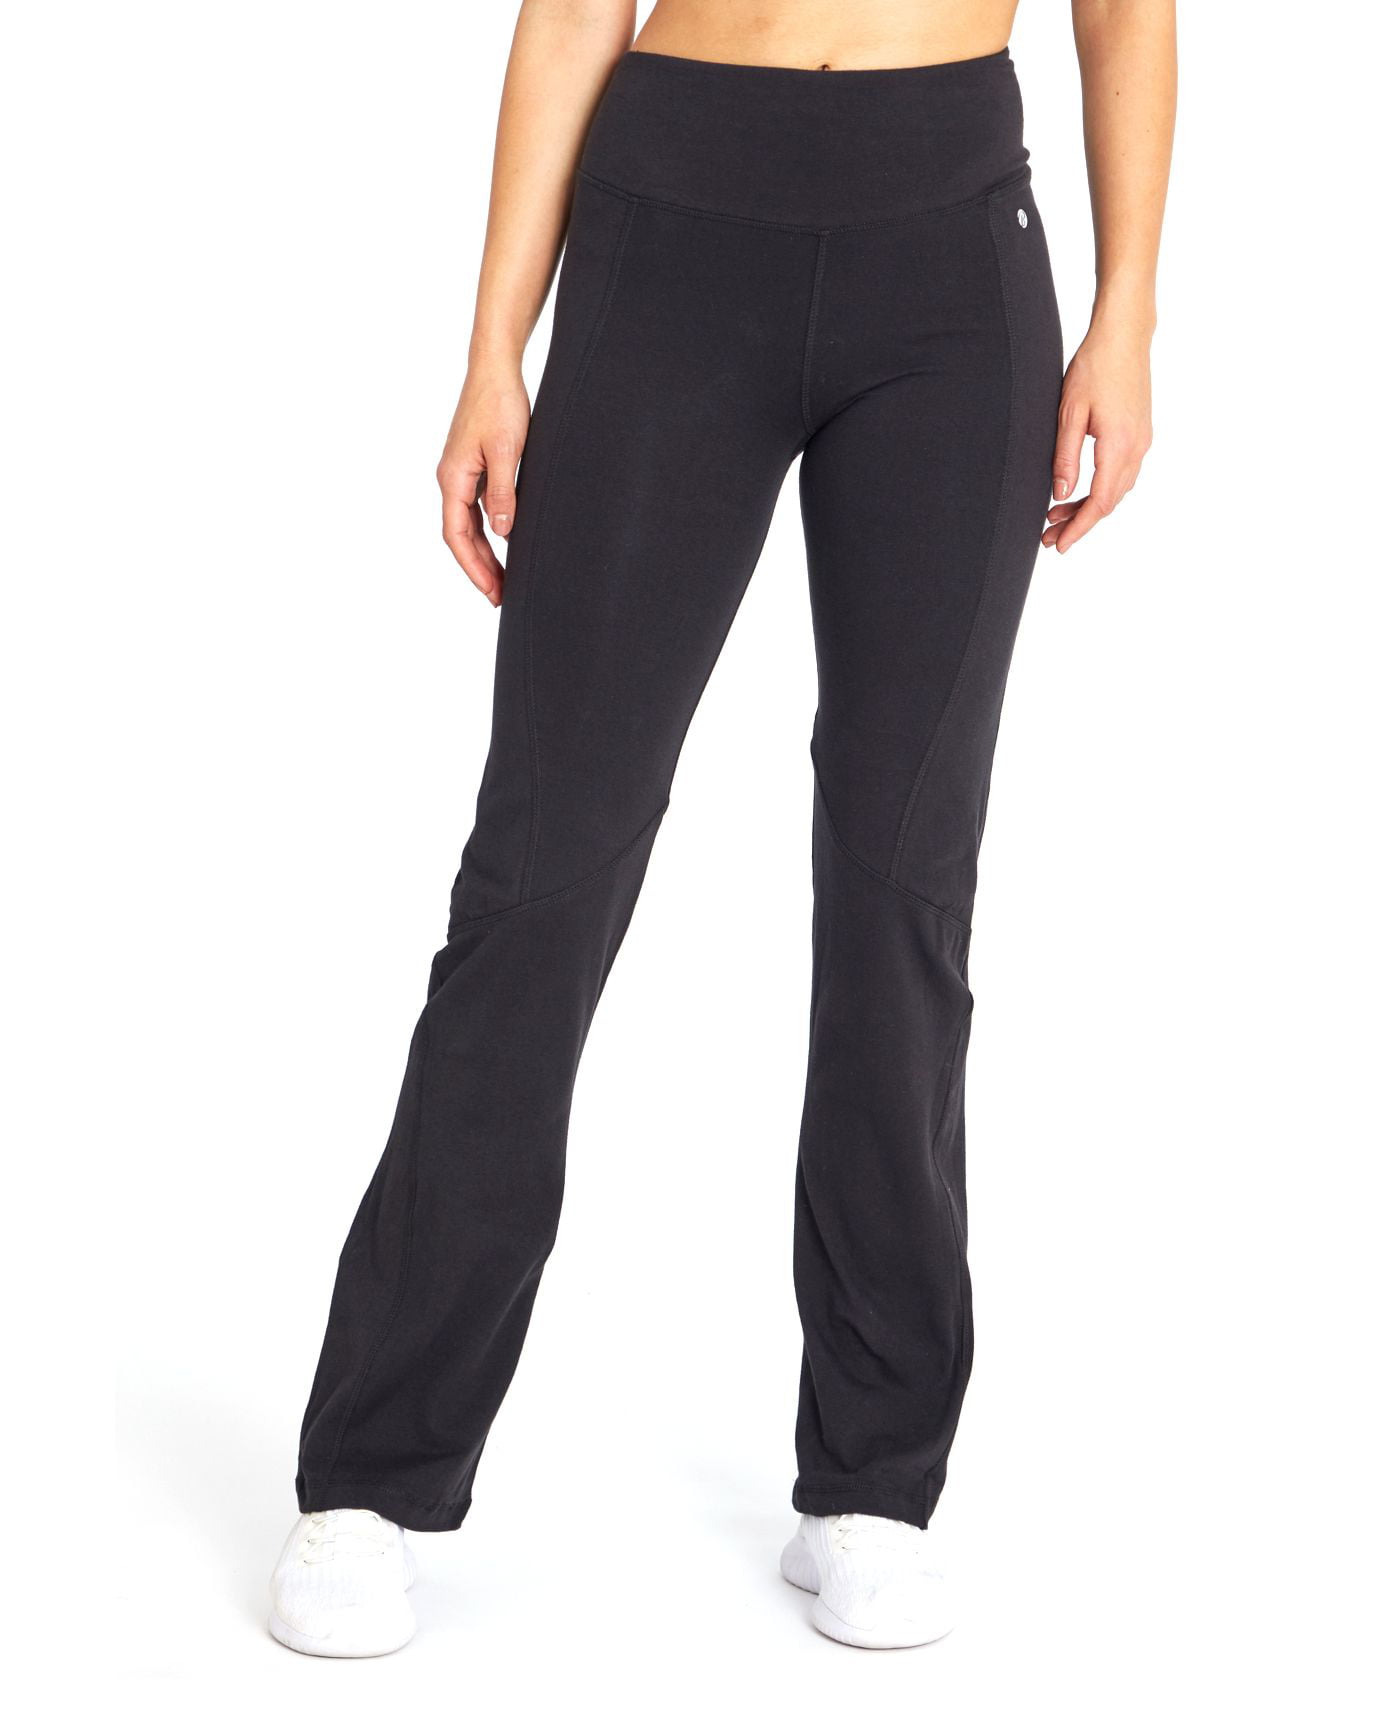 Bally Total Fitness - Bally Total Fitness Women's Active Ultimate ...